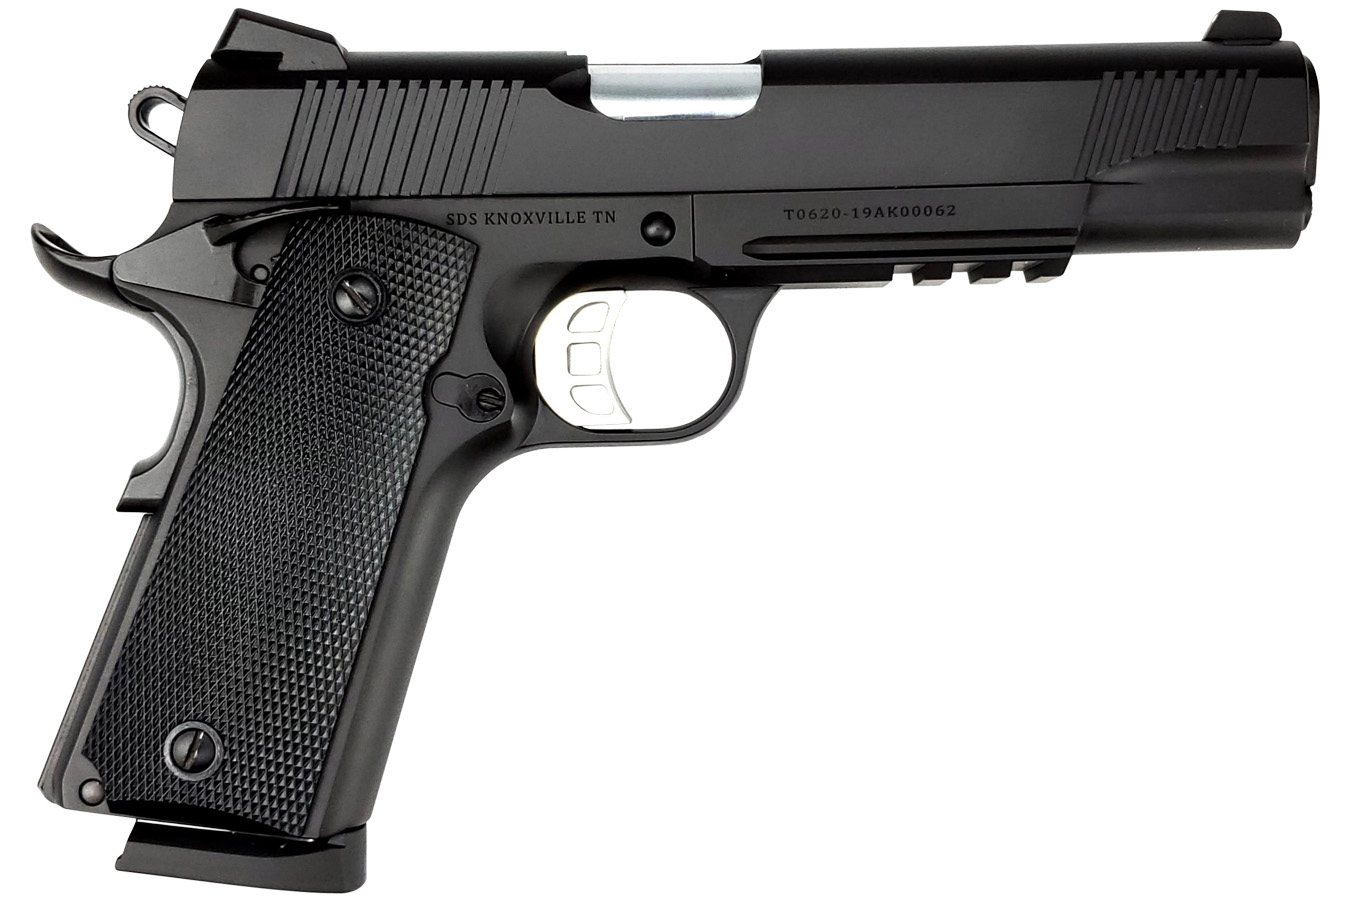 No. 10 Best Selling: TISAS 1911 DUTY B45R (45ACP FULL SIZE 1911, CERAKOTE, UPGRADED FEATURES, RAIL)